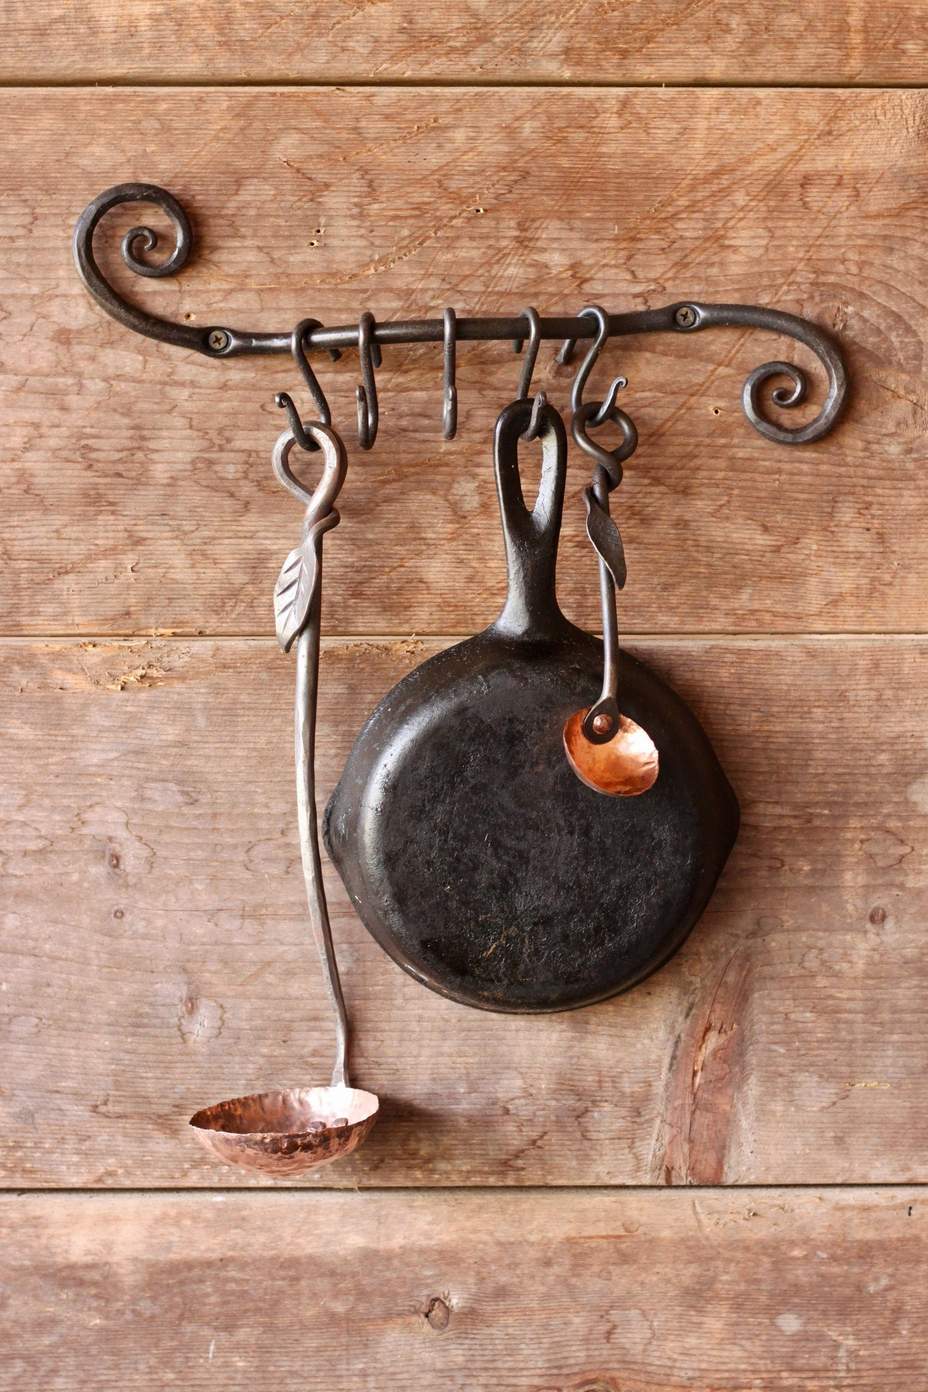 https://wroughtworks.com/images/wrought-iron/wrought-iron-pot-rack-scroll.jpg